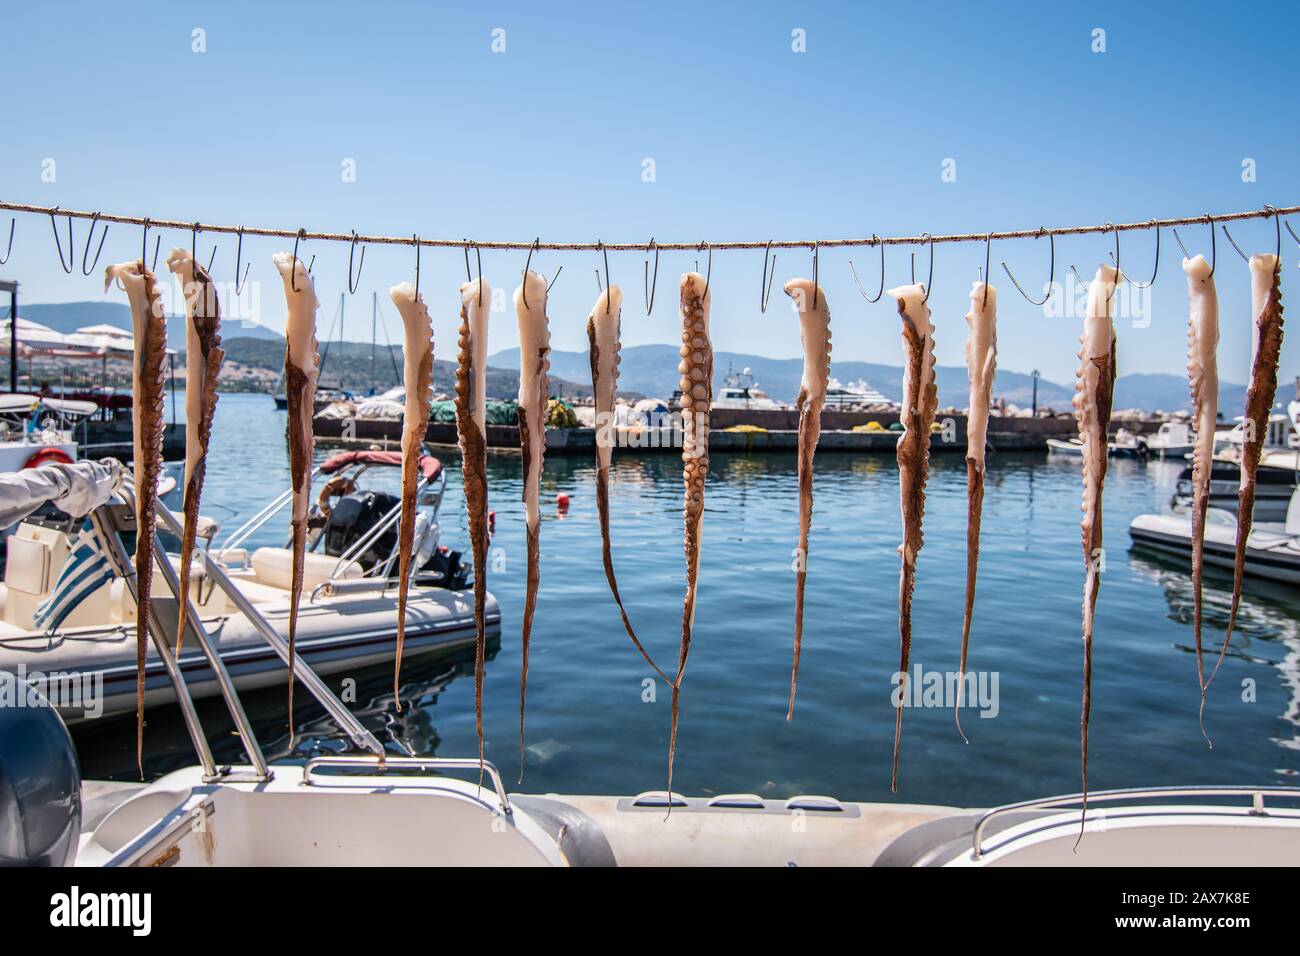 Fresh octopus tentacles drying on a wire in the sun in Molyvos harbor, Lesbos Island, Greece. Stock Photo